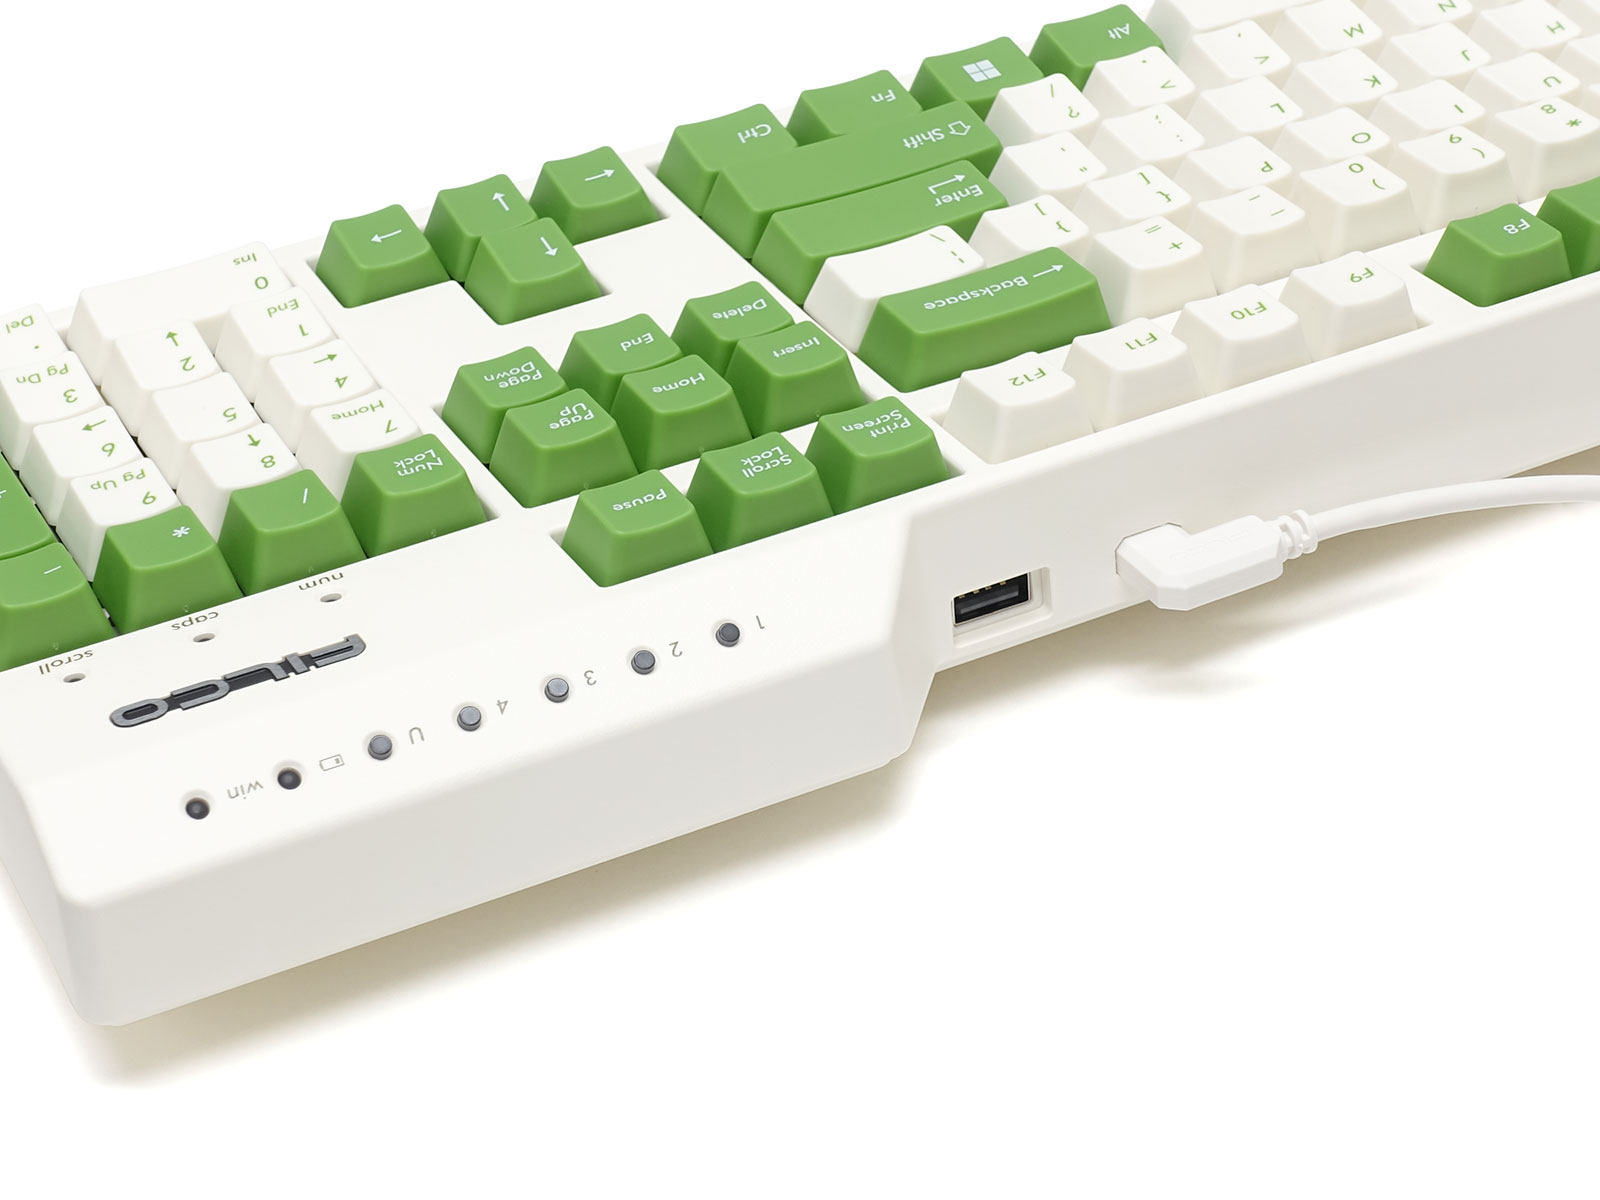 Majestouch Convertible 3 Cream White & Green: image 10 of 12 thumb